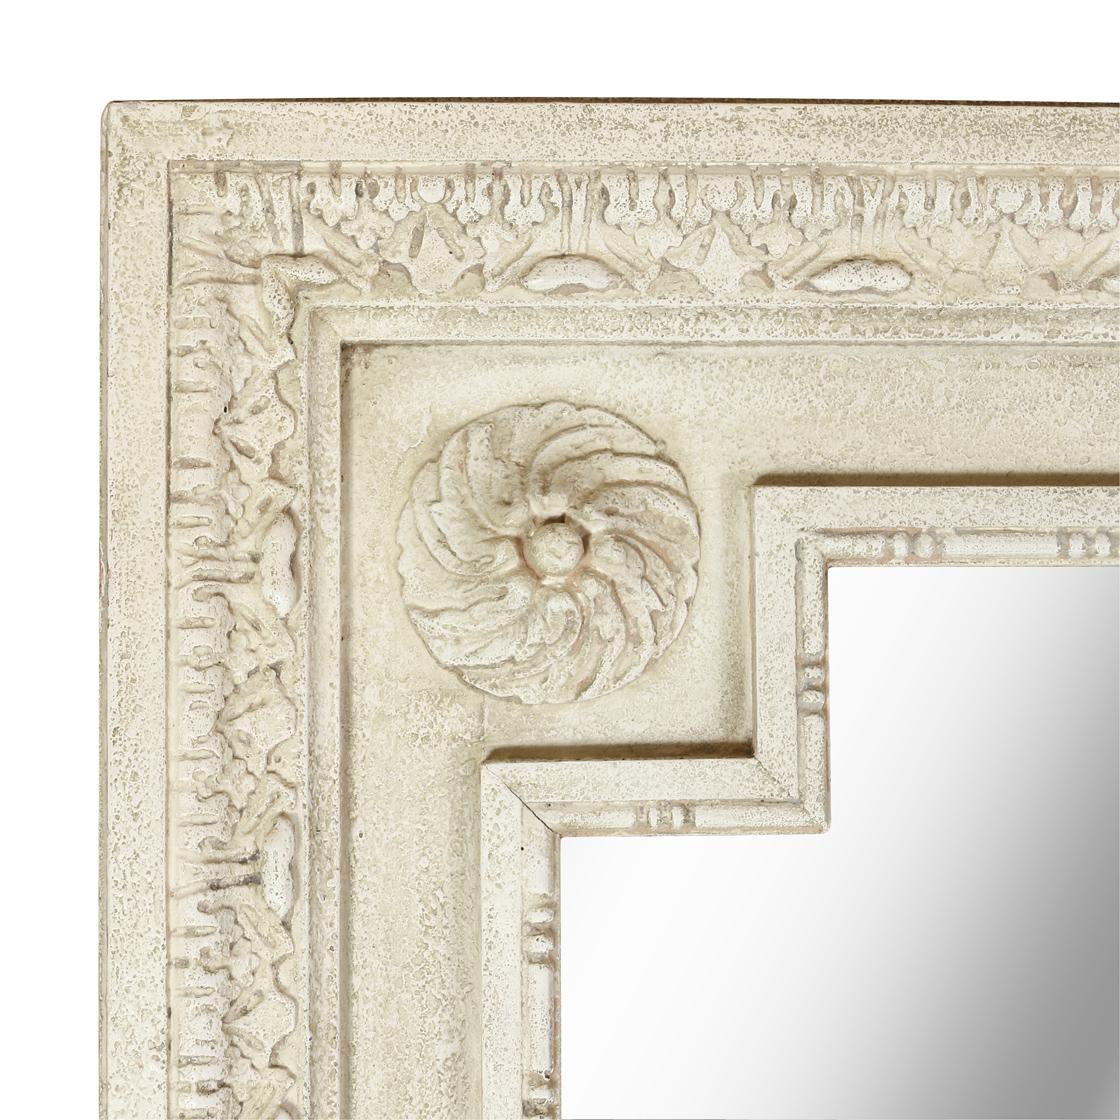 A large cream painted French carved neoclassical pier mirror with carved acanthus leaves and medallions at each mirror corner.